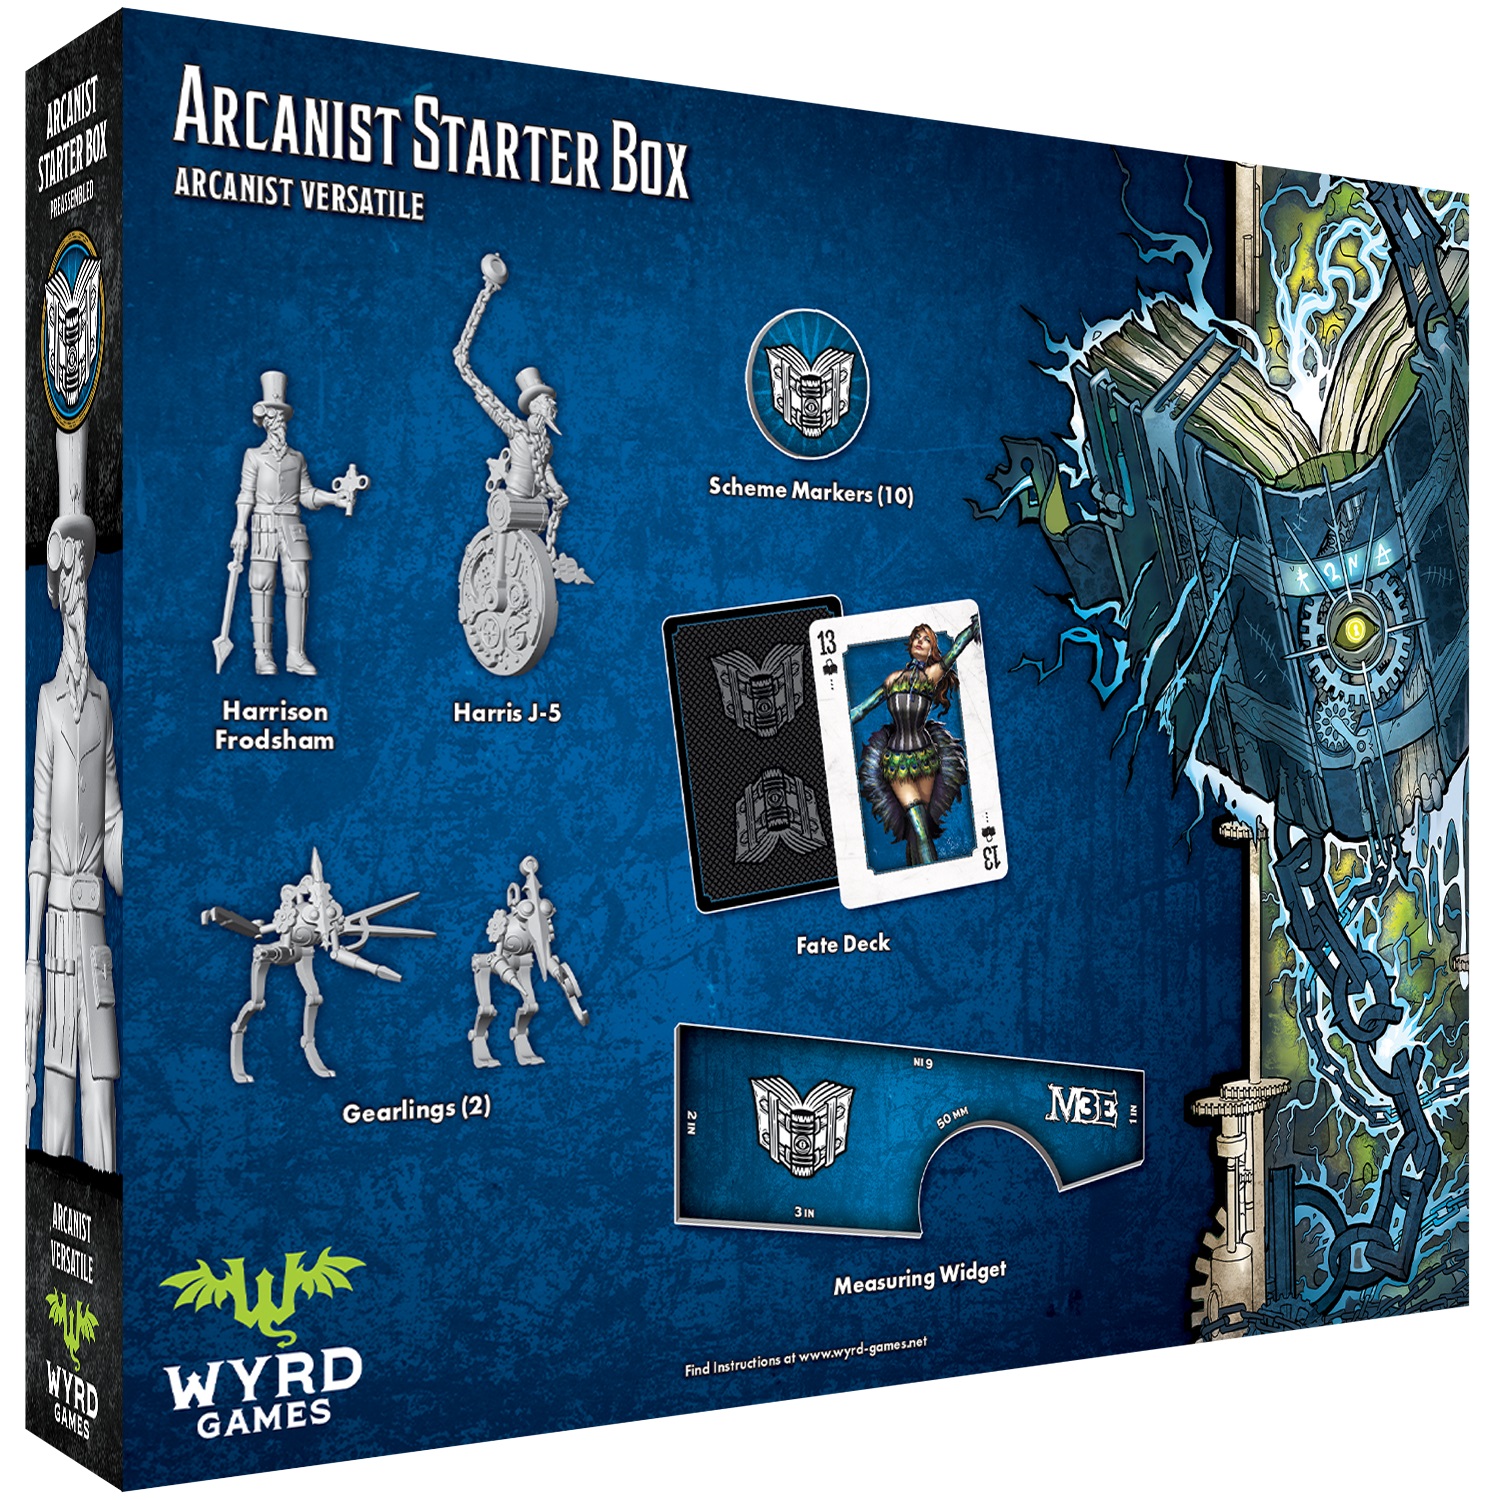 Arcanists Clash With Ten Thunders In New Malifaux Starter Sets ...